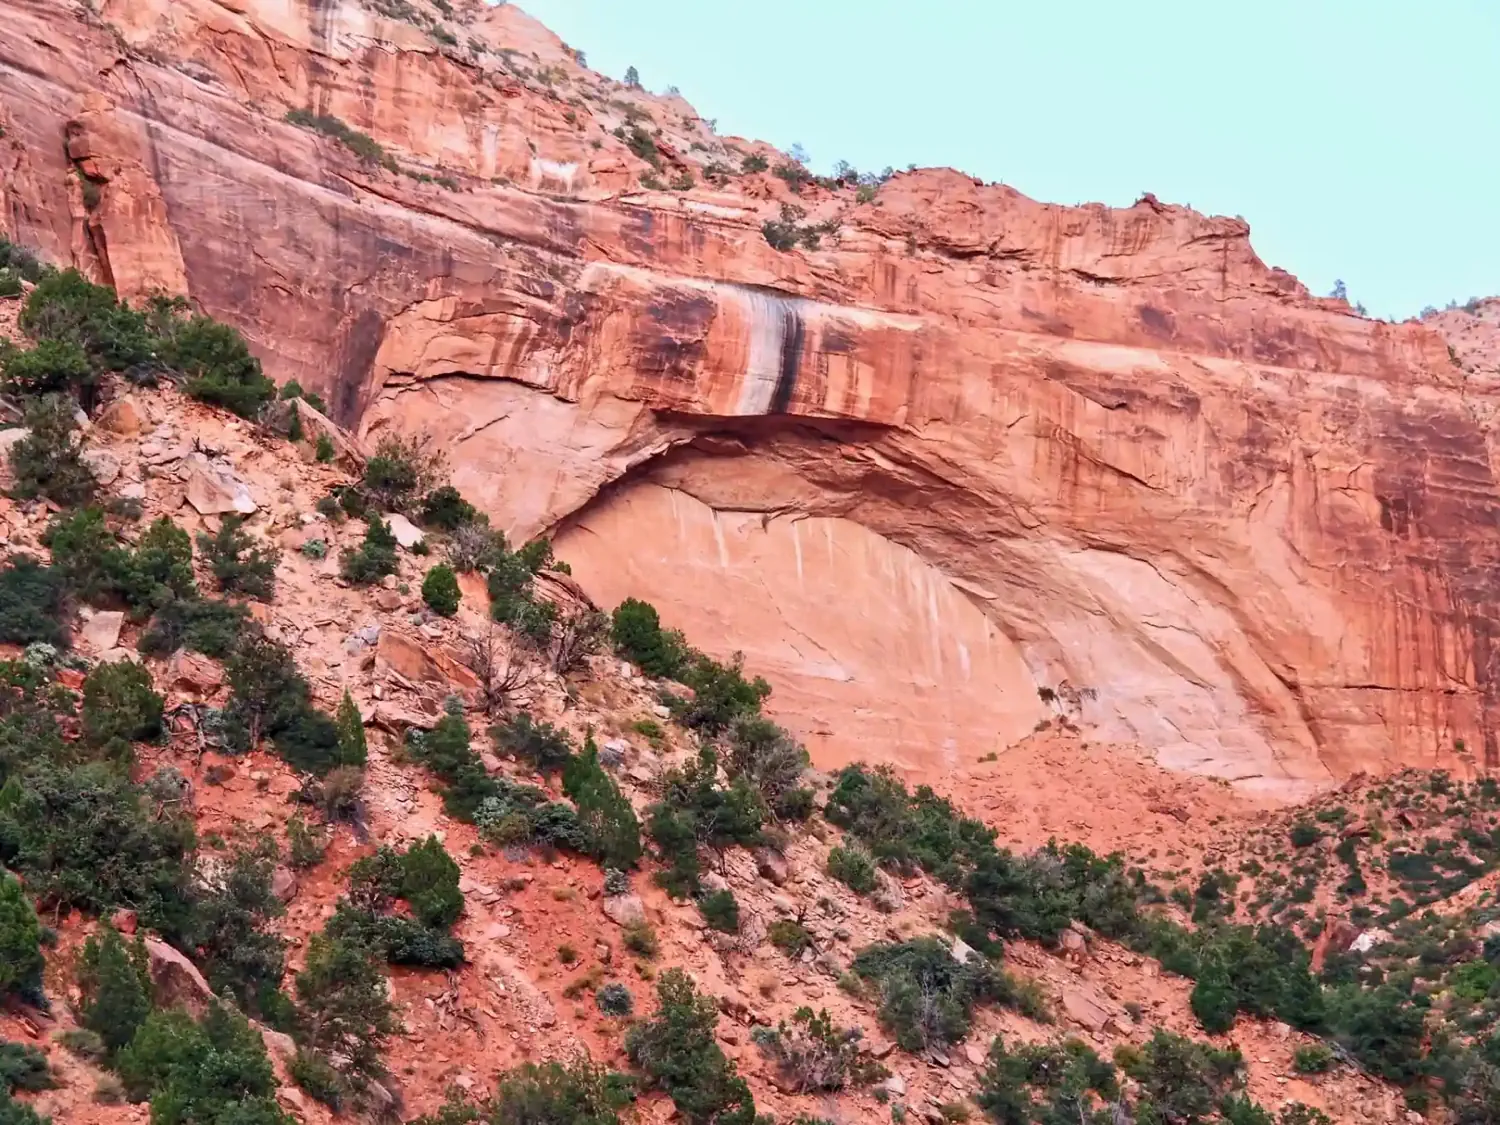 The "Great Arch" being formed in the canyon walls